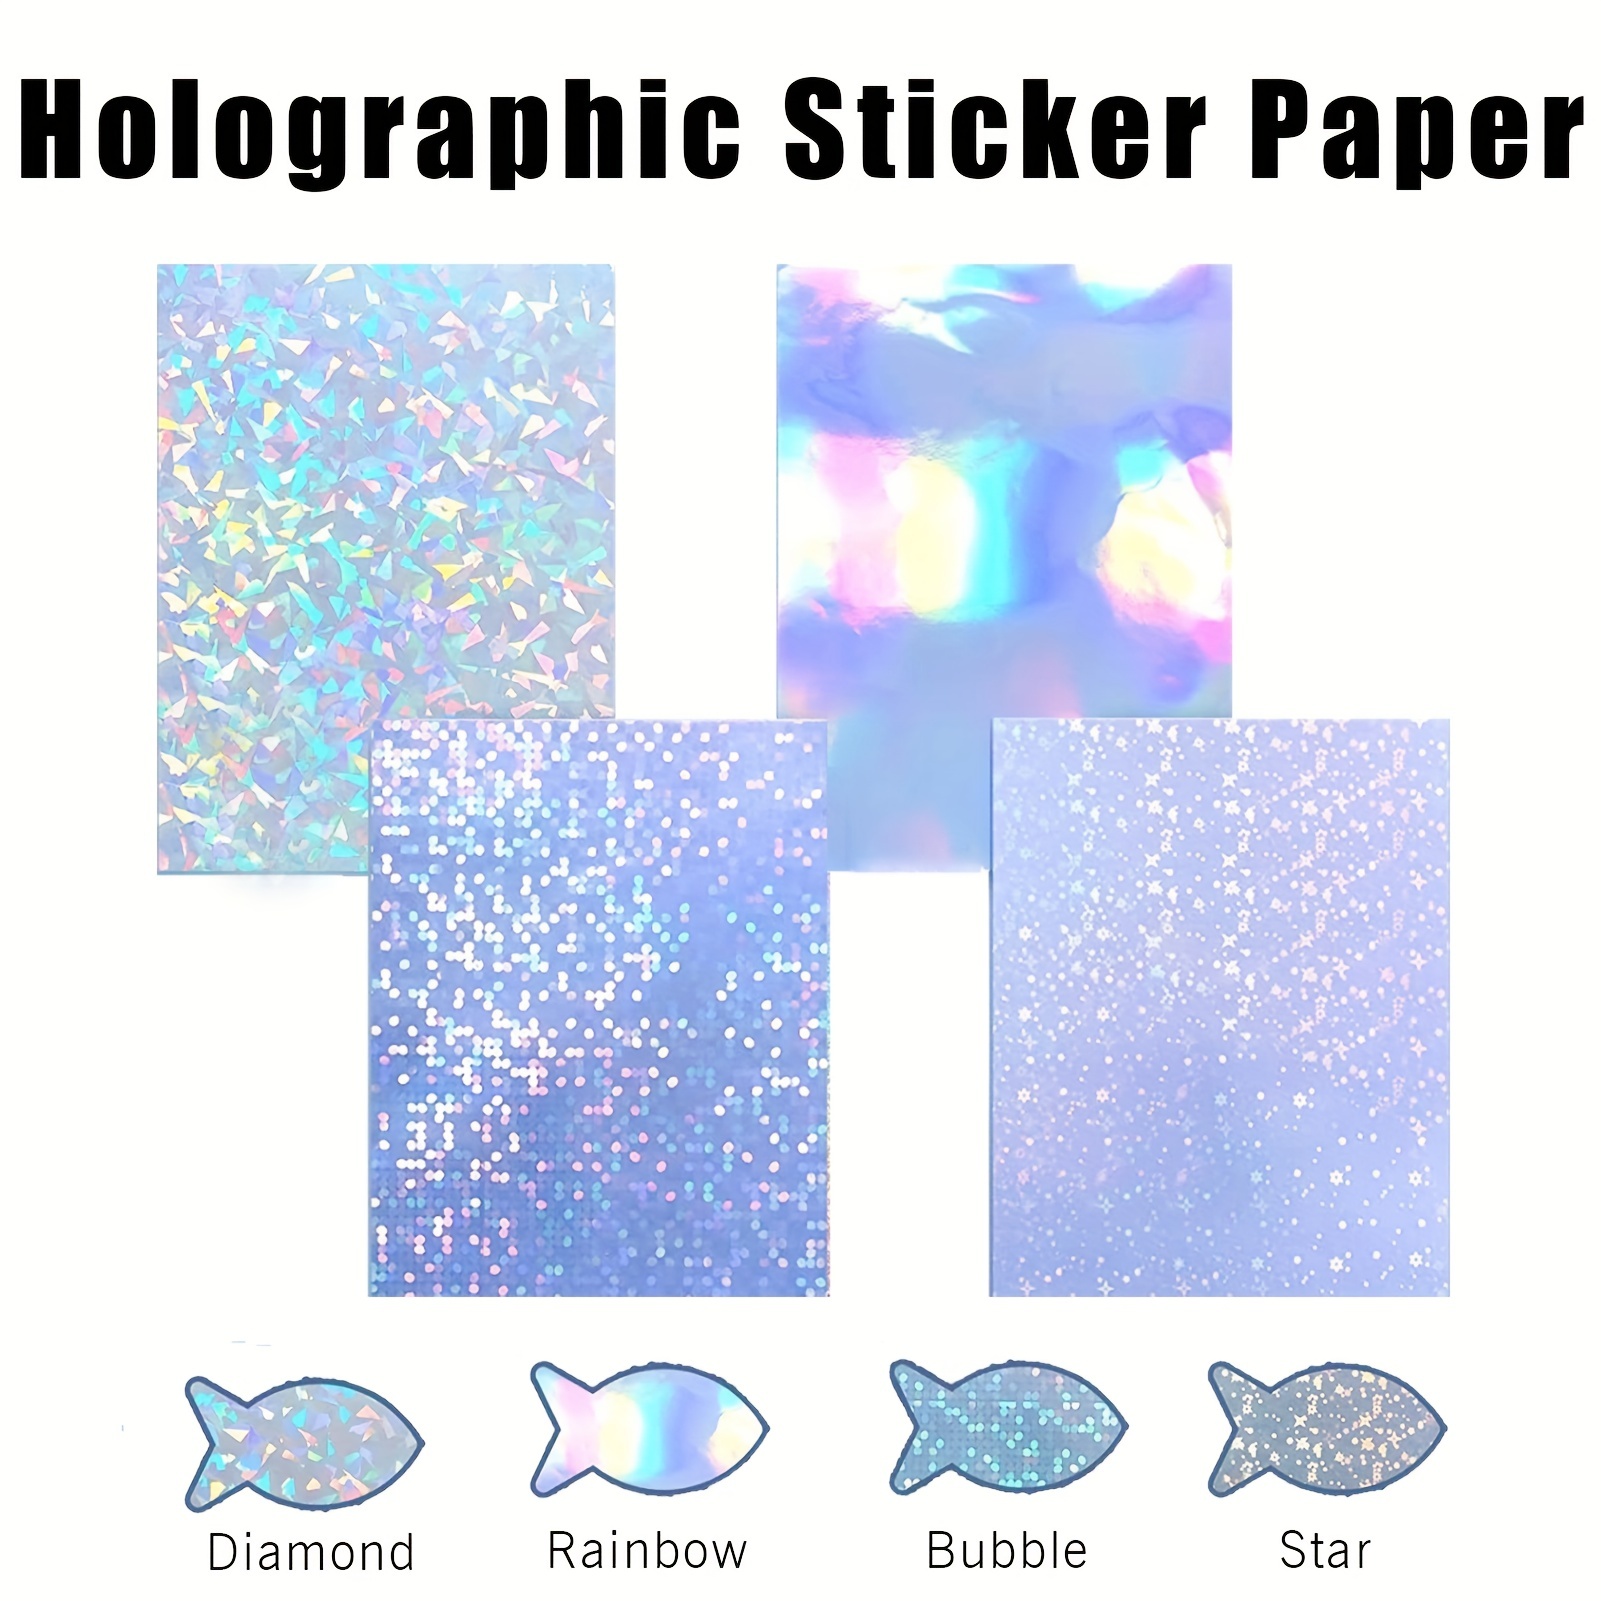 Koala Holographic Sticker Paper Clear RAINBOW, Transparent Laminting Sheets  A4